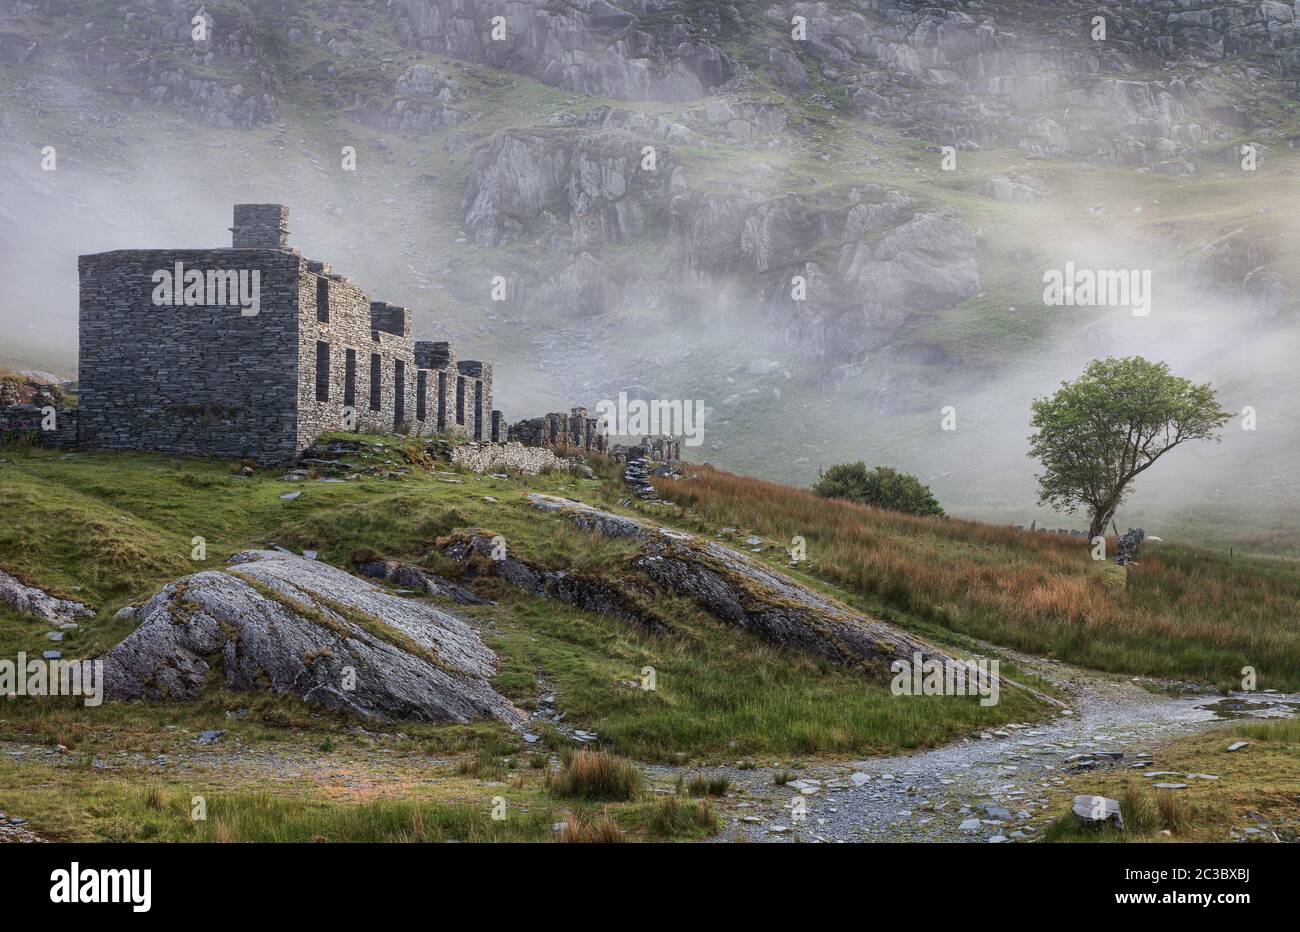 Cwmorthin is a substantial Victorian-era slate mine above the village of Tanygrisau, circling the slate quarrying town of Blaenau Ffestiniog. It has a Stock Photo